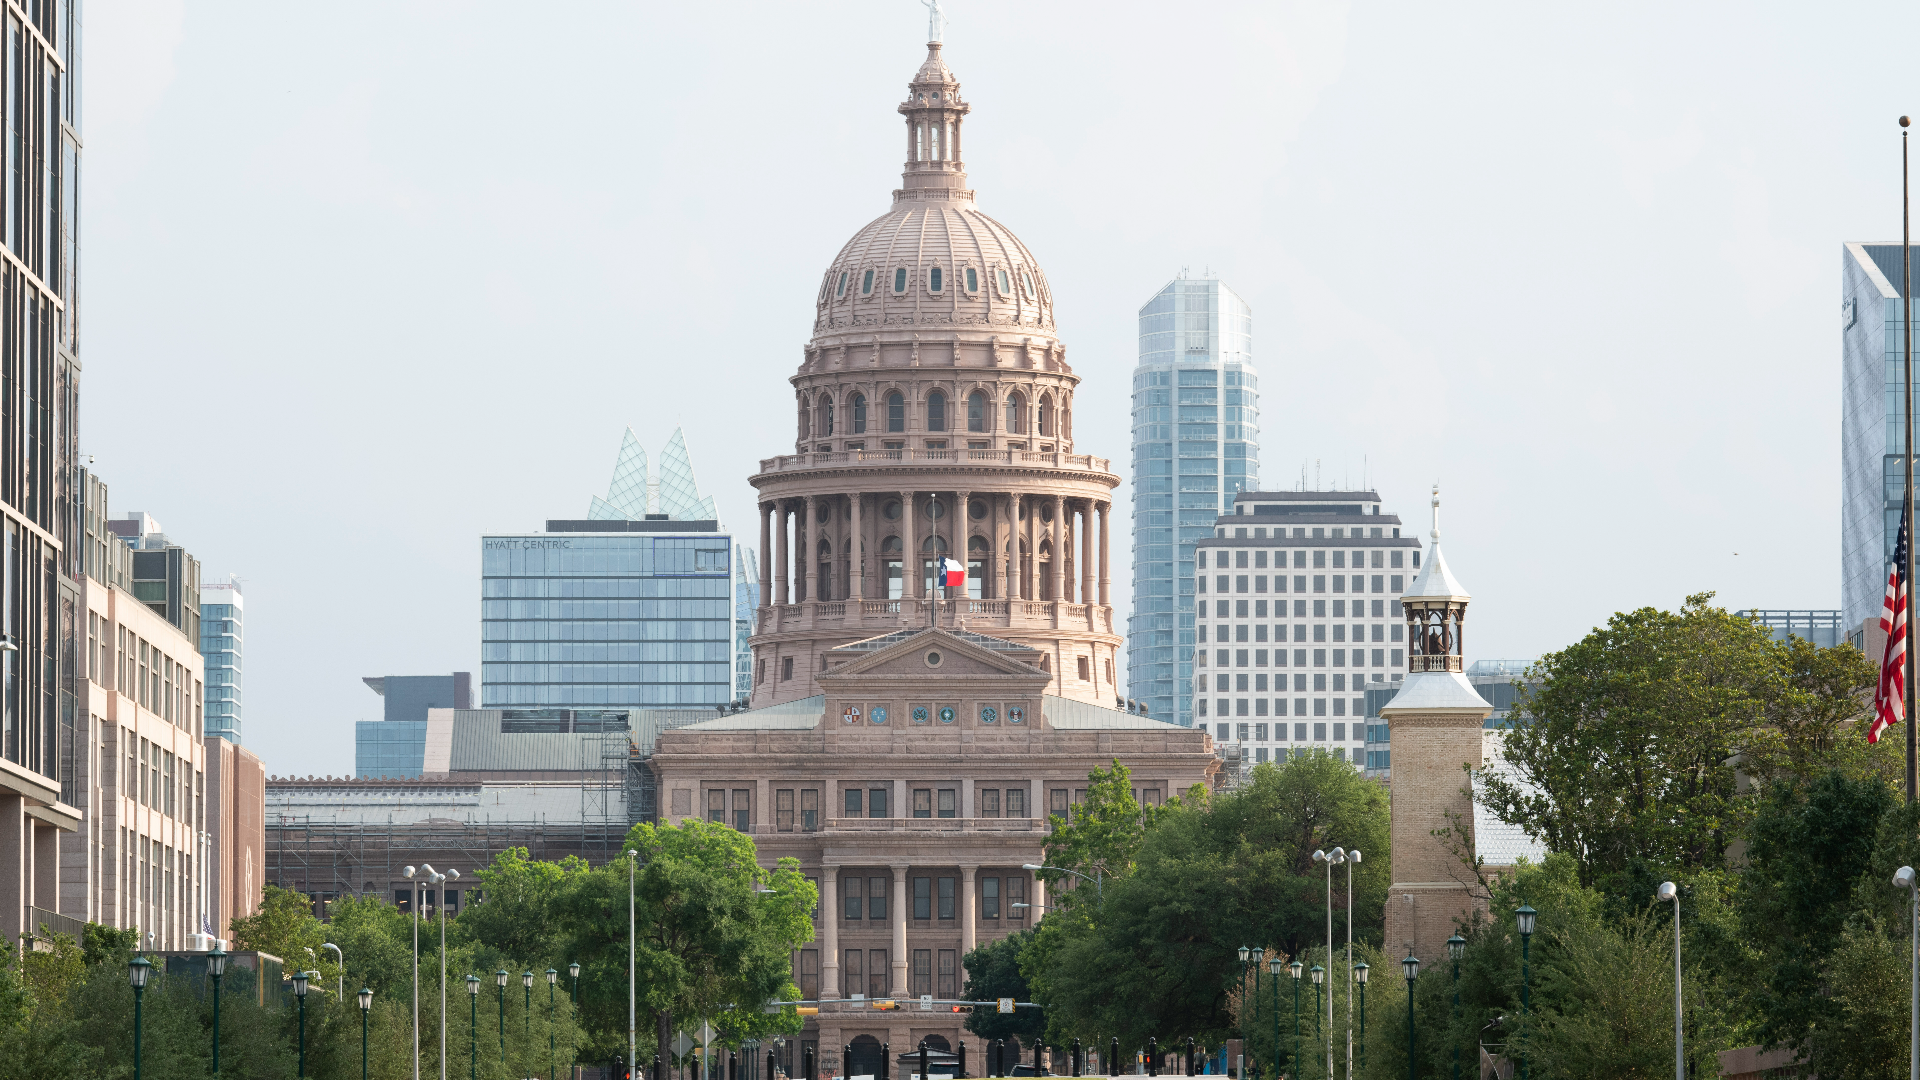 On Monday, House Speaker Dade Phelan announced the creation of the House Select Committee on Securing Texas from Hostile Foreign Organizations.